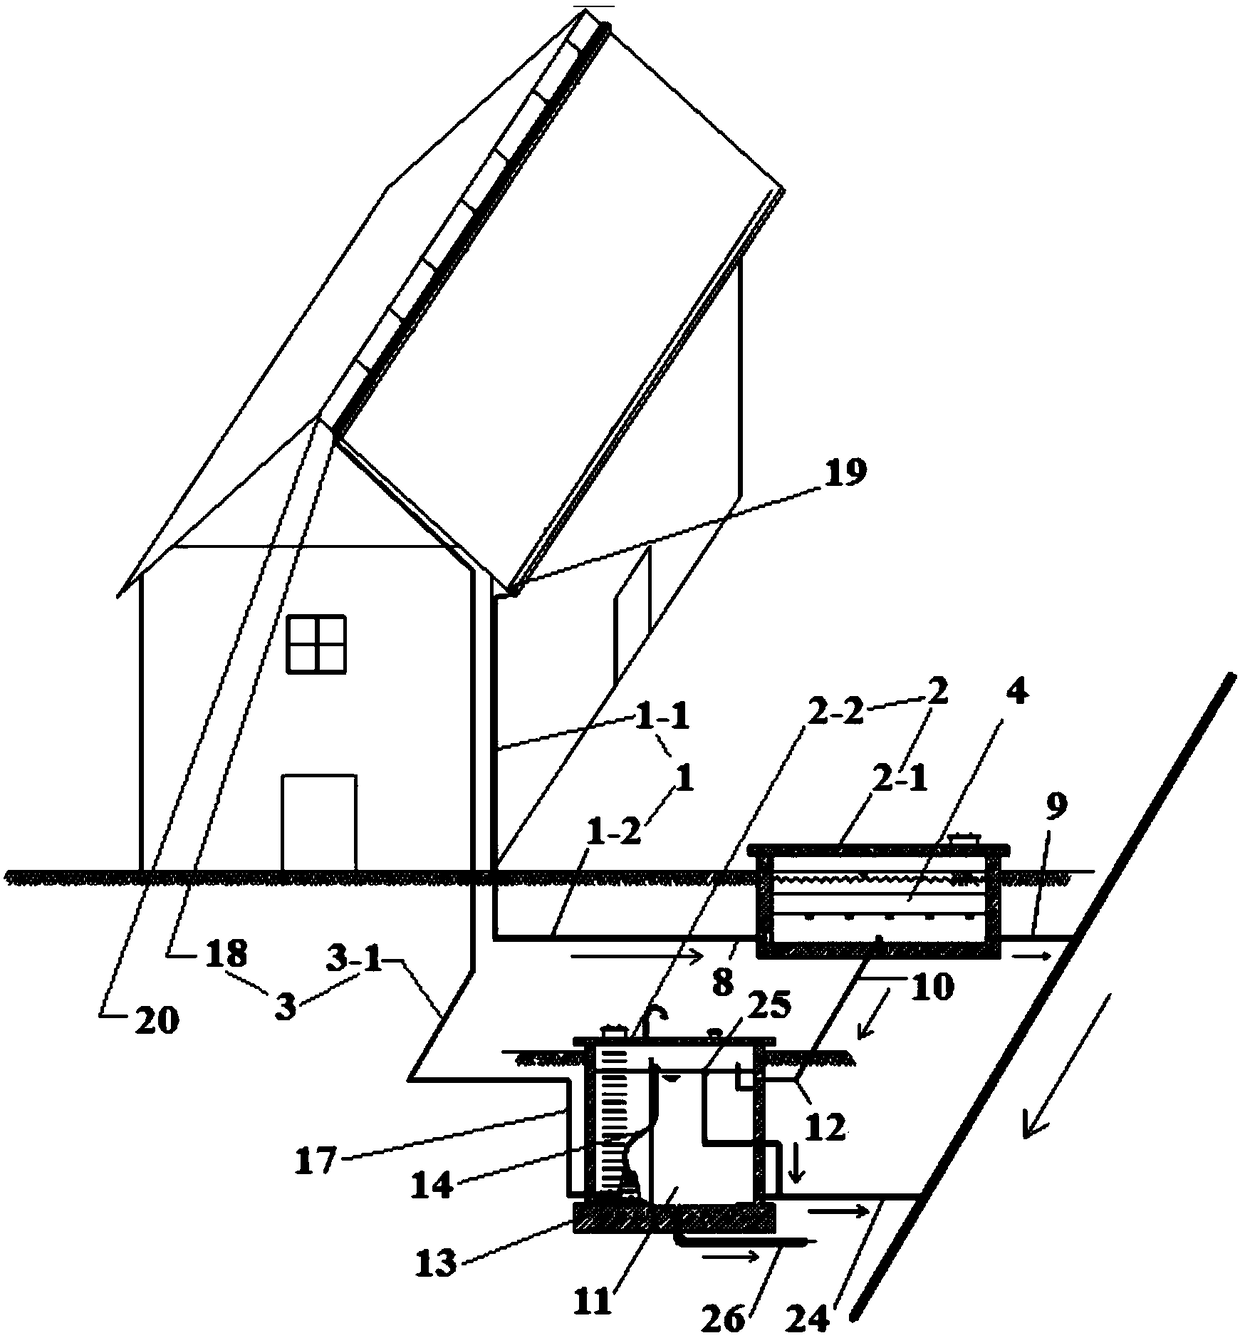 Method and device for indoor temperature reduction through roofing rain